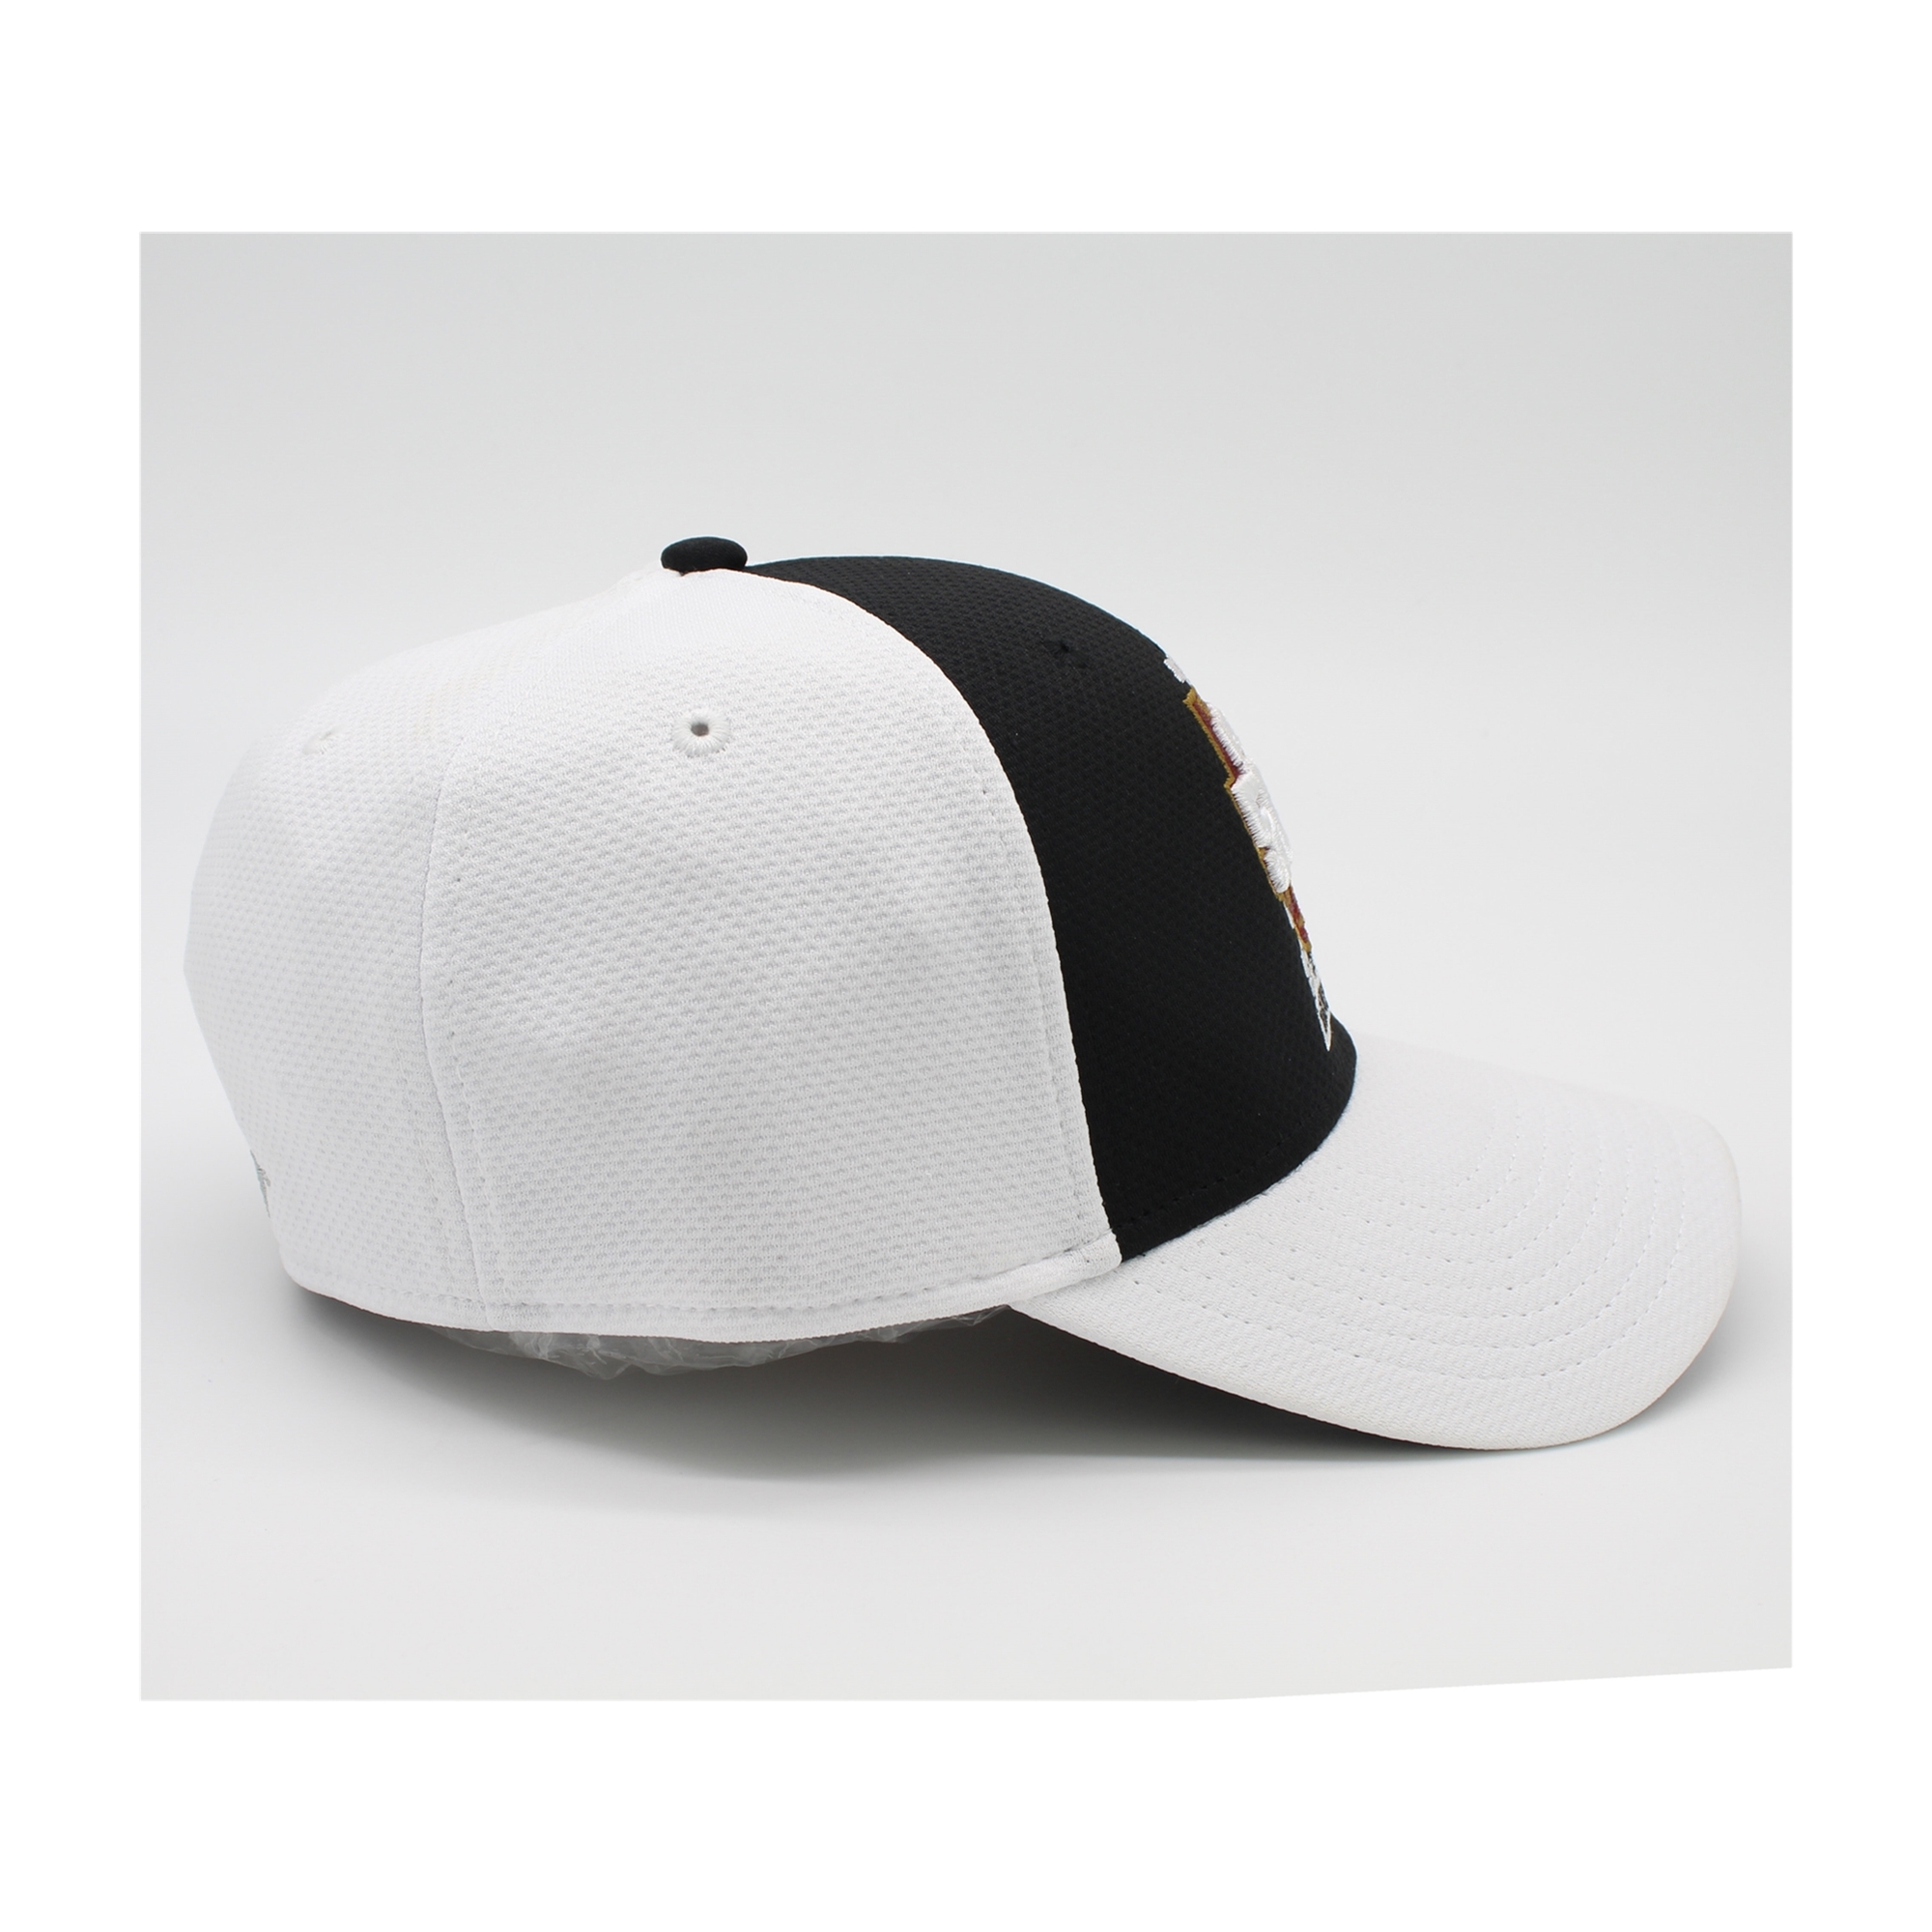 INDY 500 Mens This Is May Fitted Baseball Cap, White, S/M - image 3 of 4